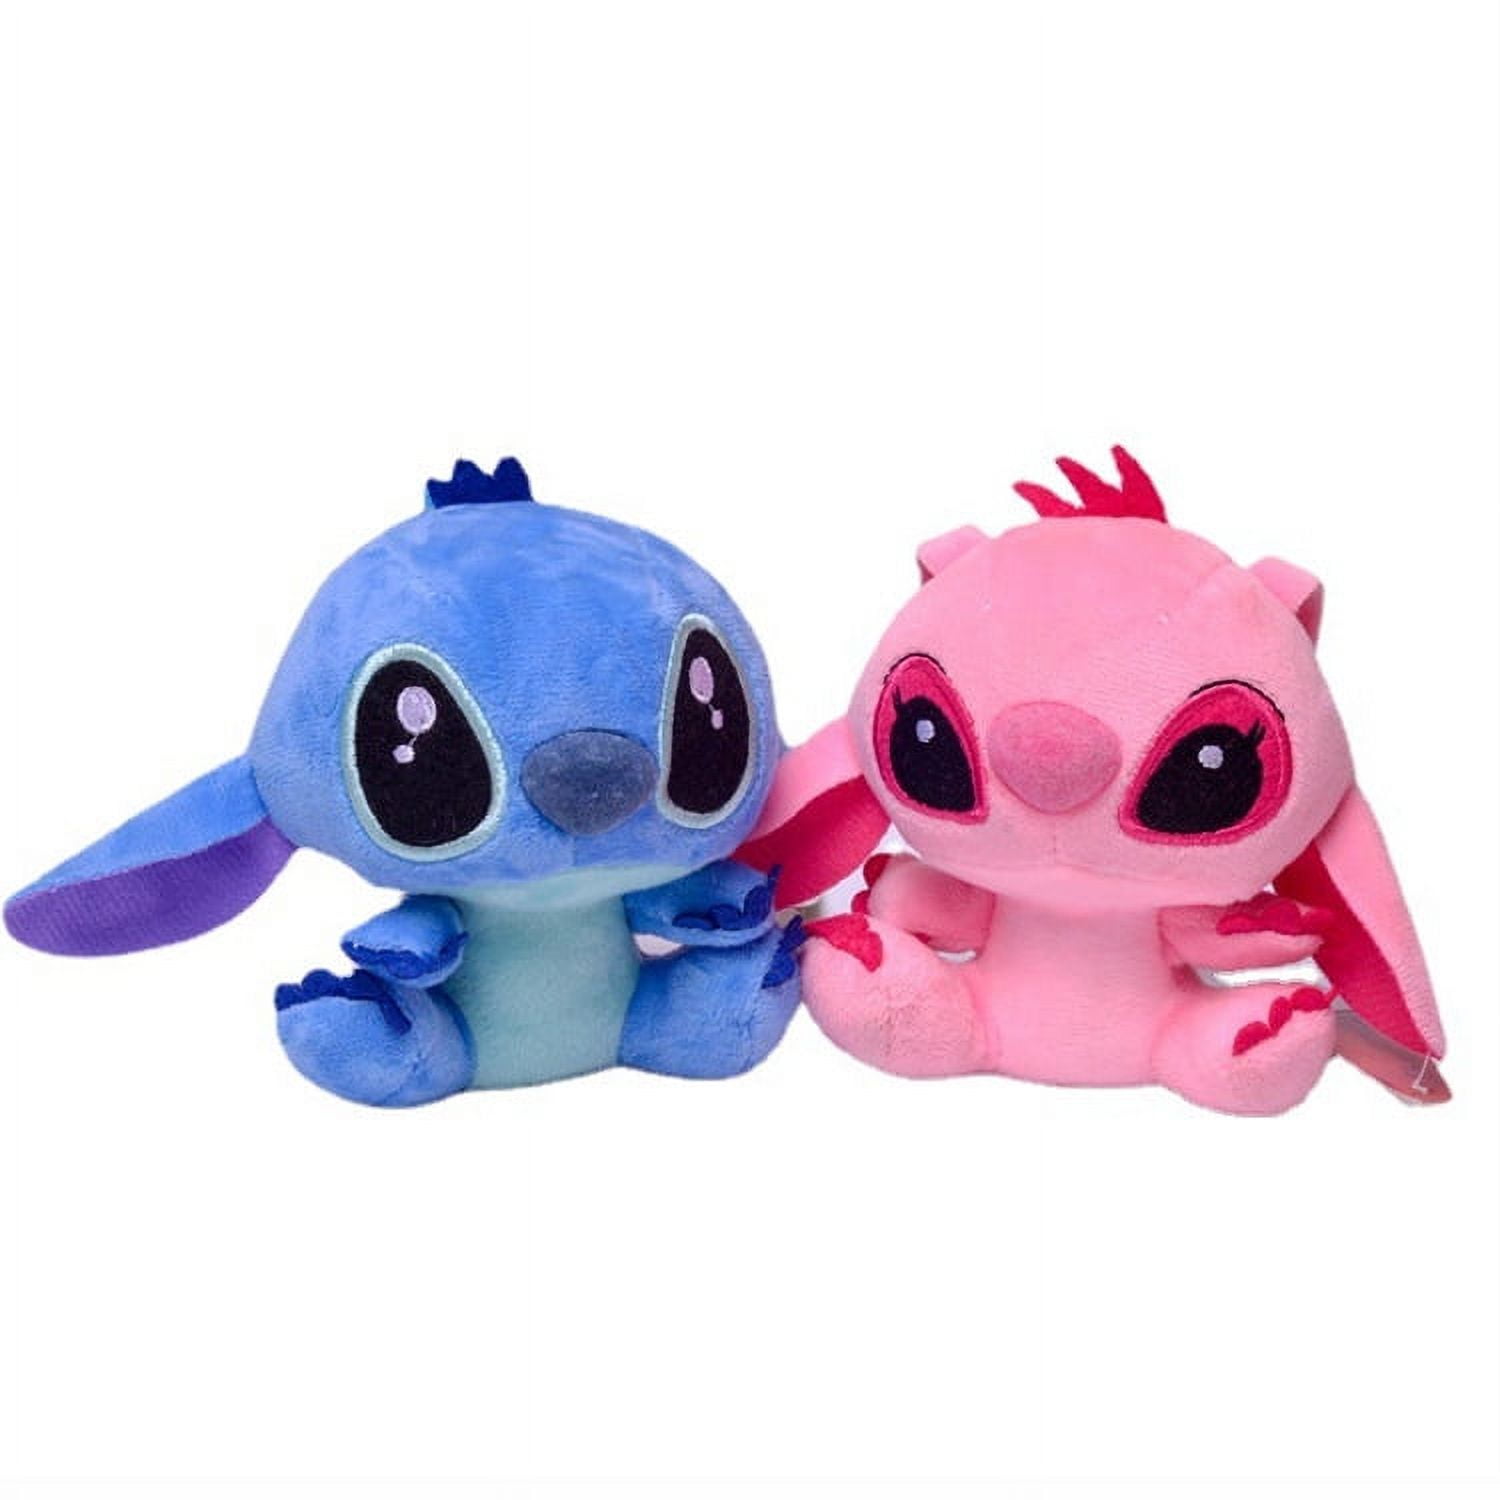 pink stitch VS blue stitch Which one would you choose? Outfit